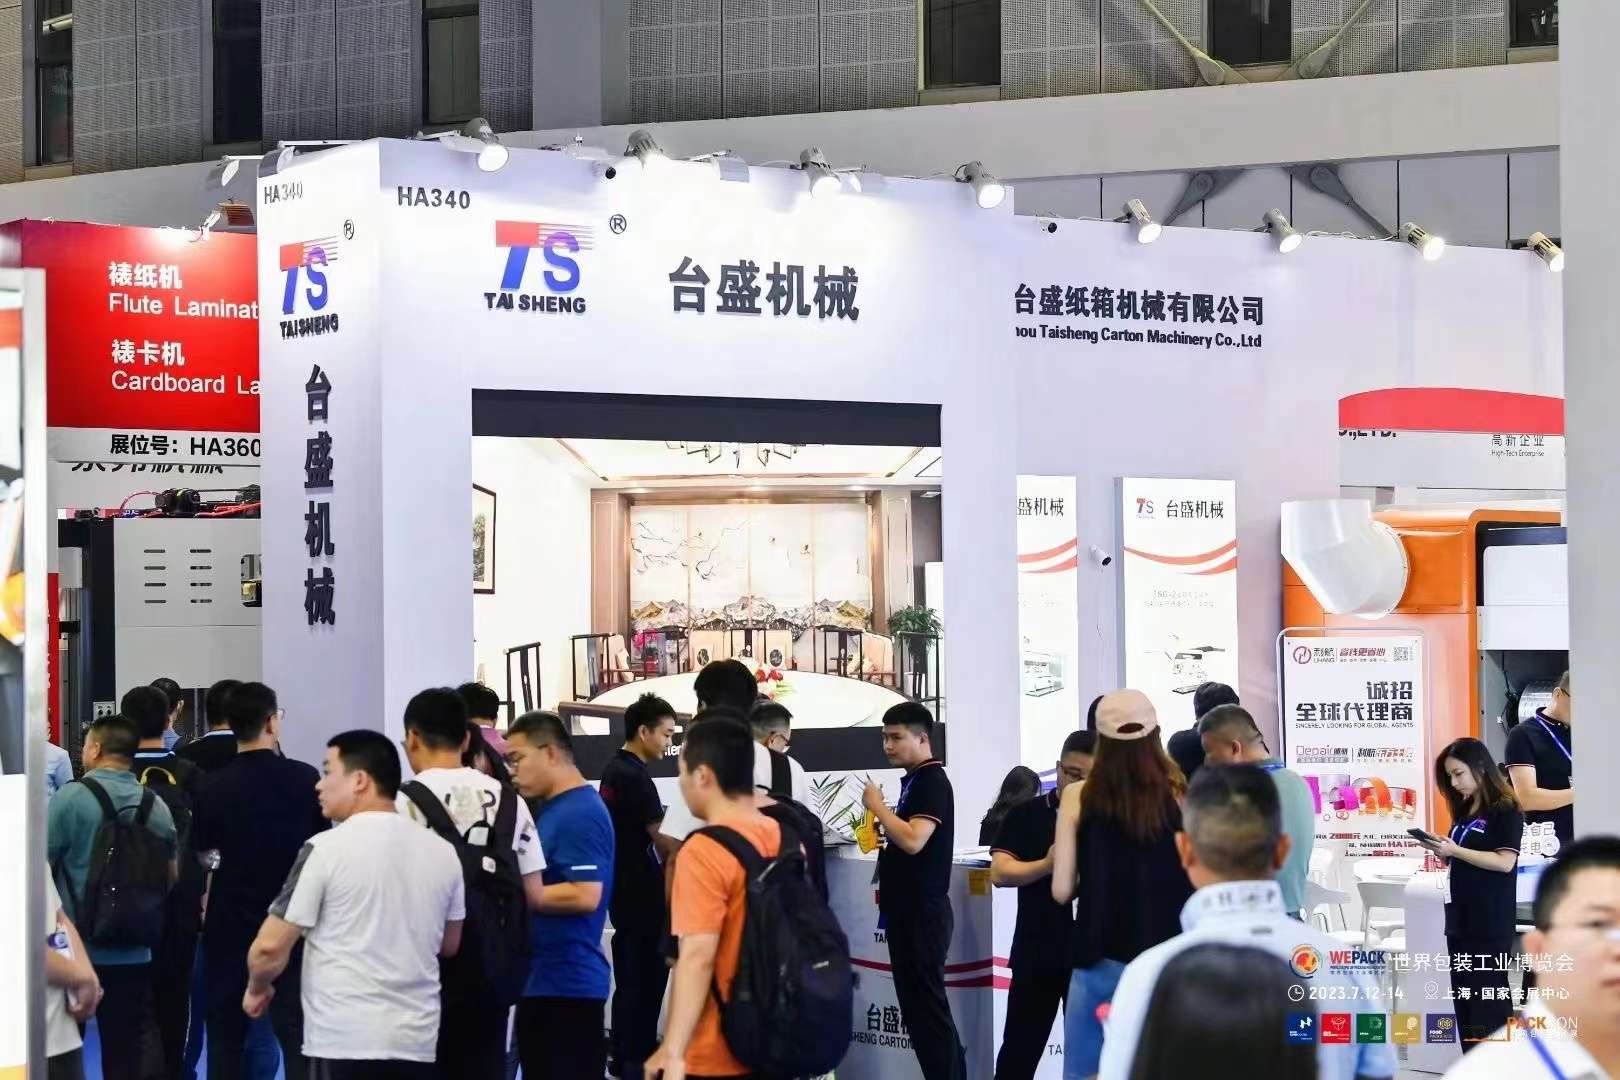 TAISHENG company gained a lot from the 2023 Corrugated Exhibition in Shanghai, China